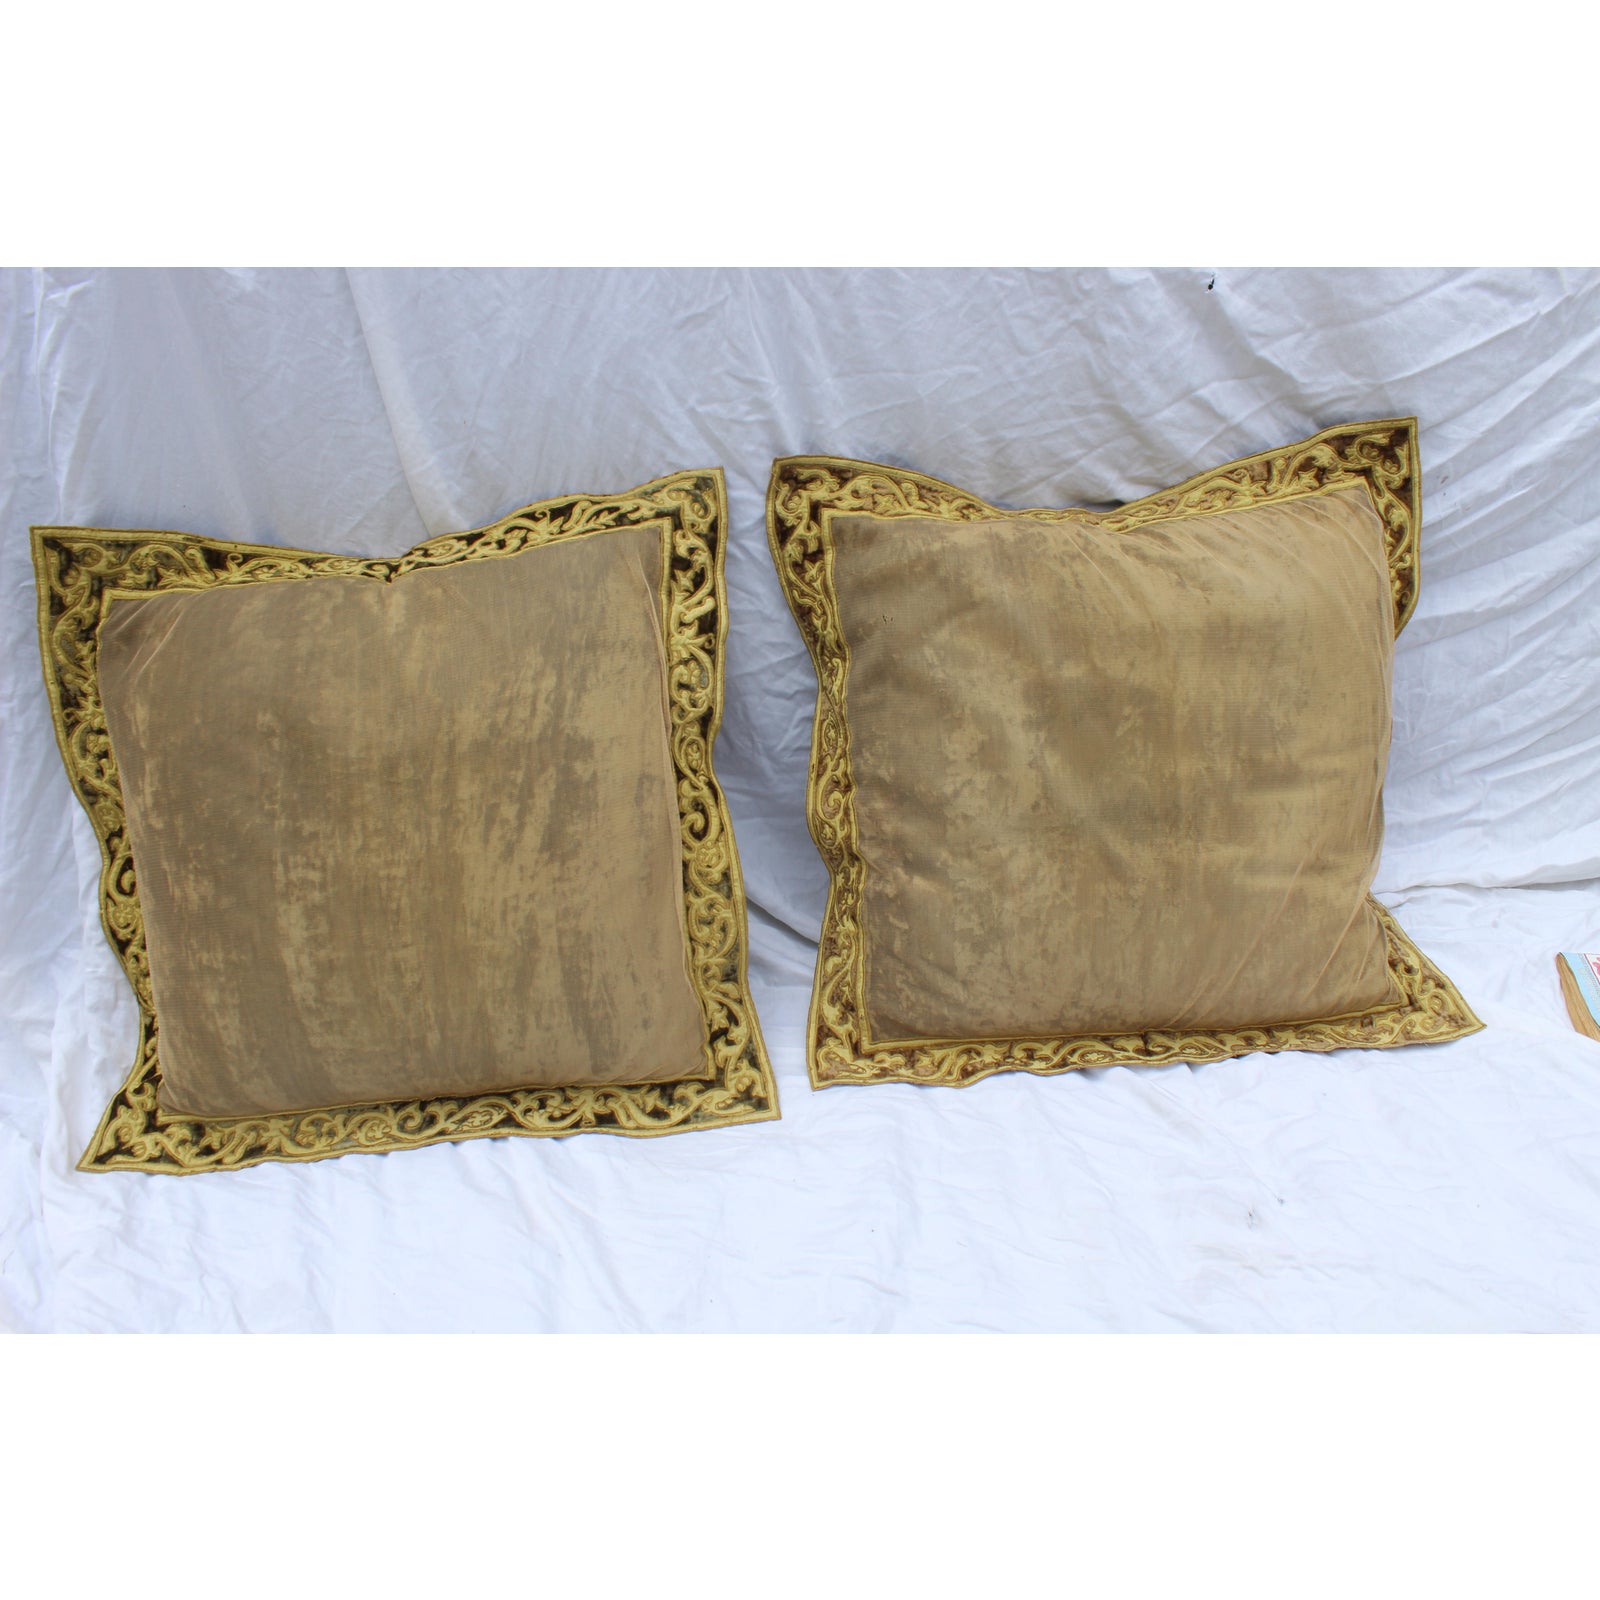 english-country-crushed-velvet-down-pillows-a-pair-2553